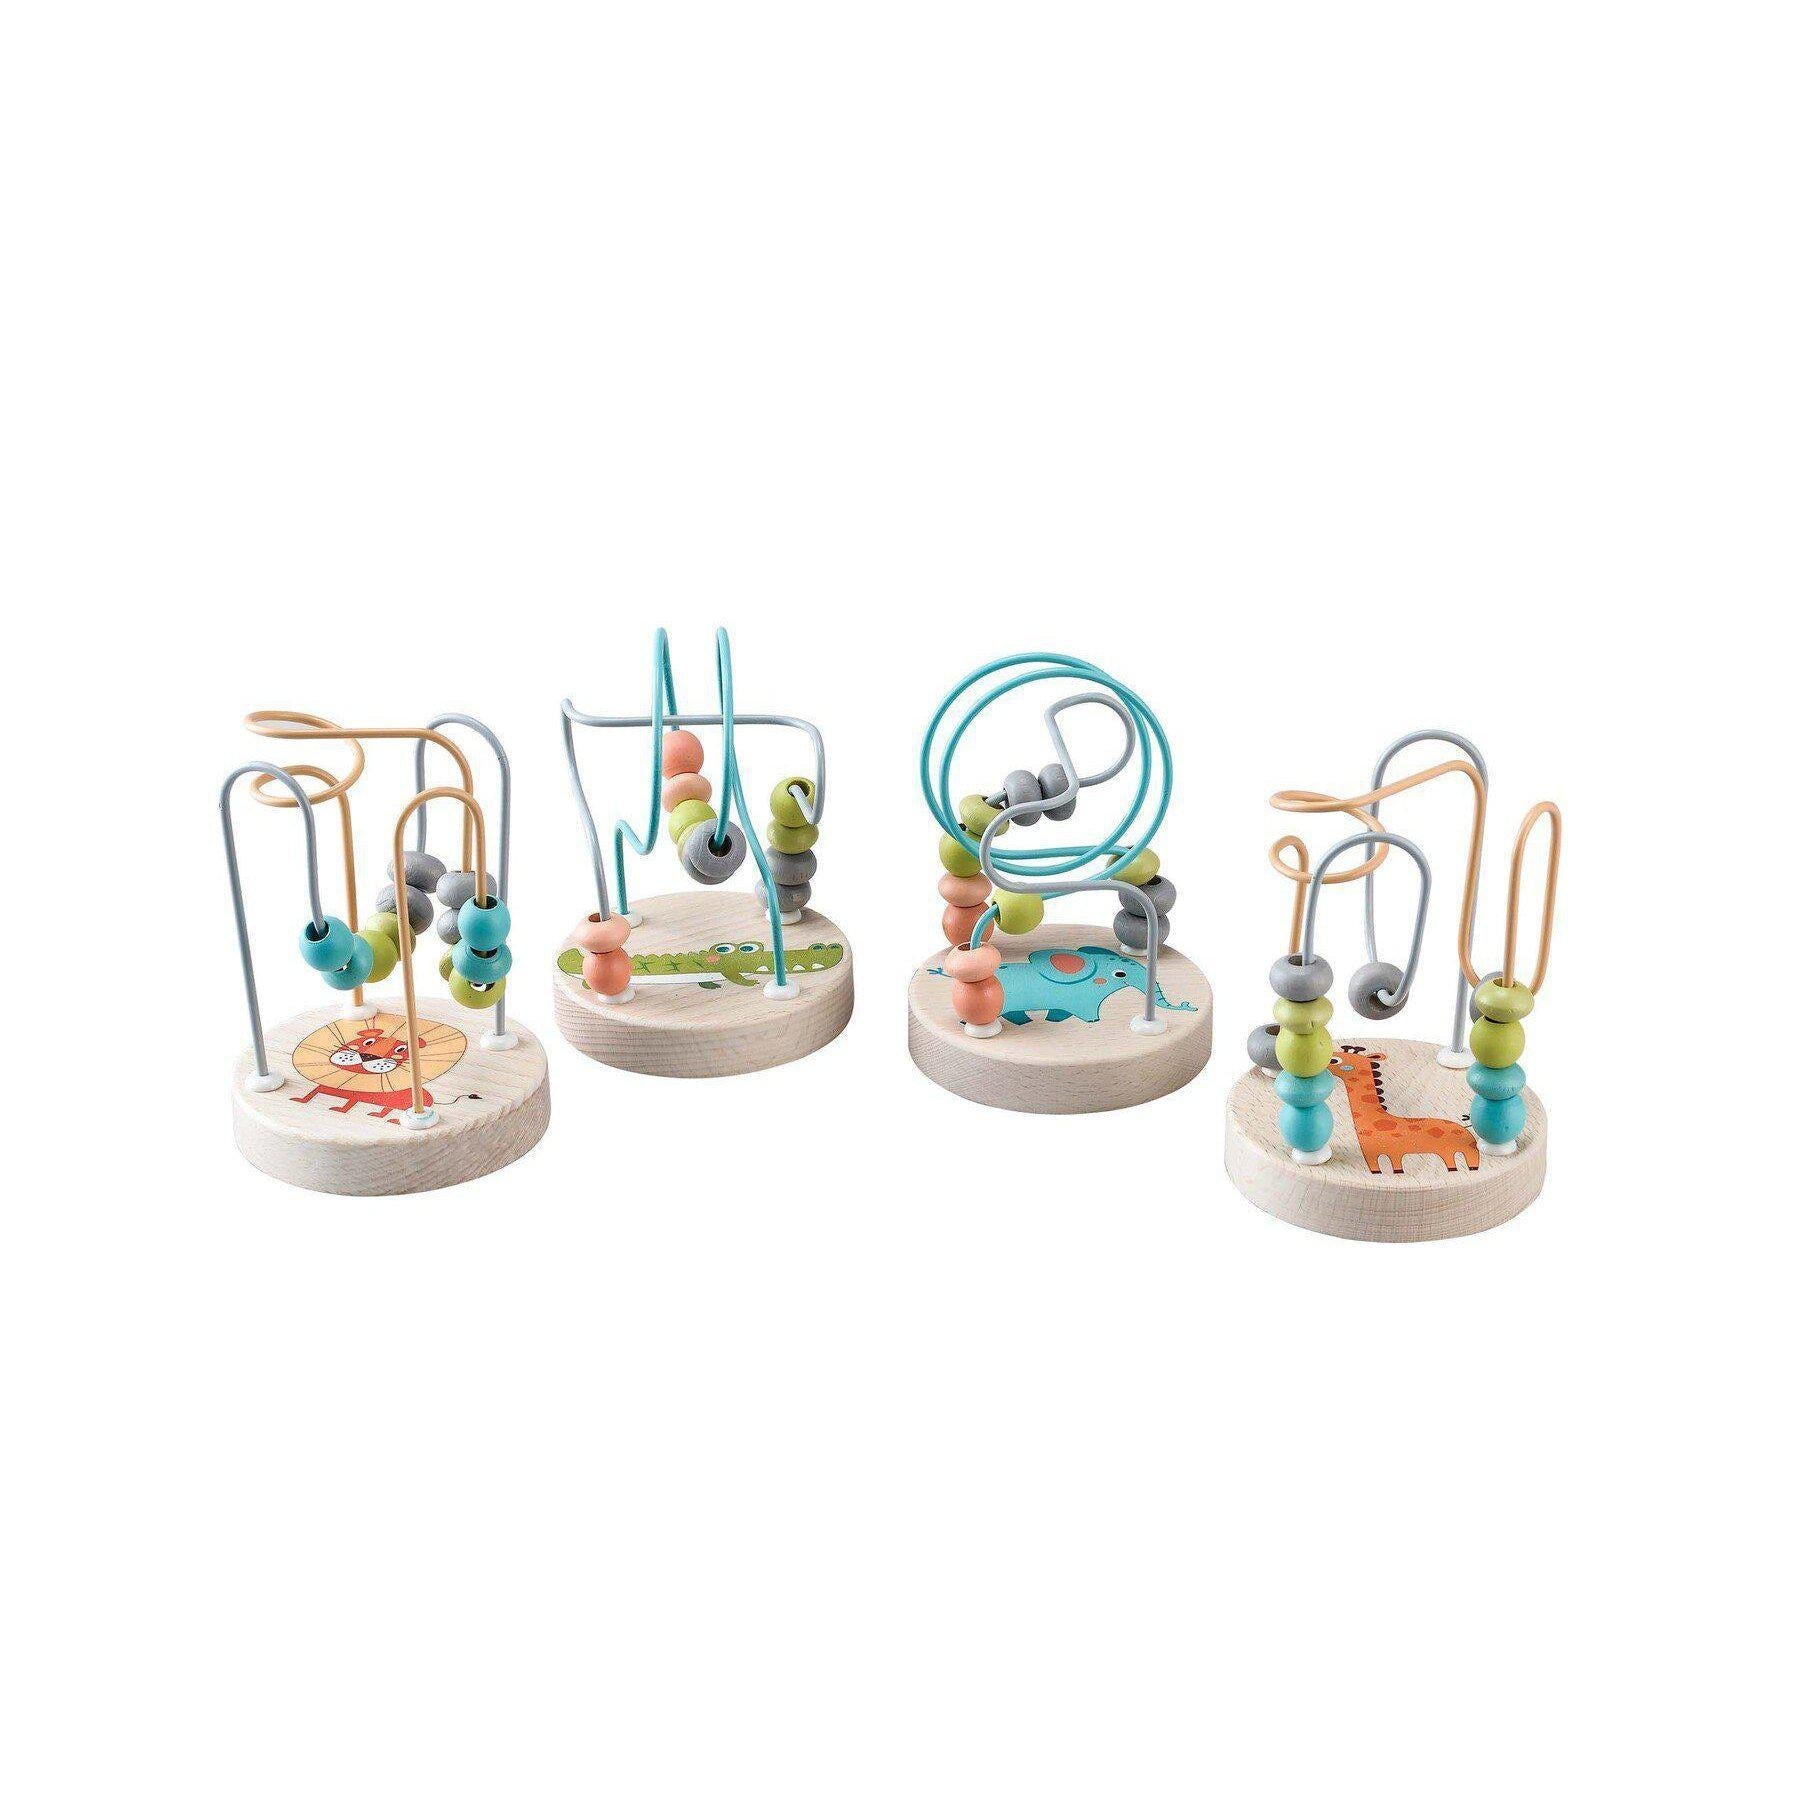 Price For 8 Assorted Jungle Animal Small Roller Coaster